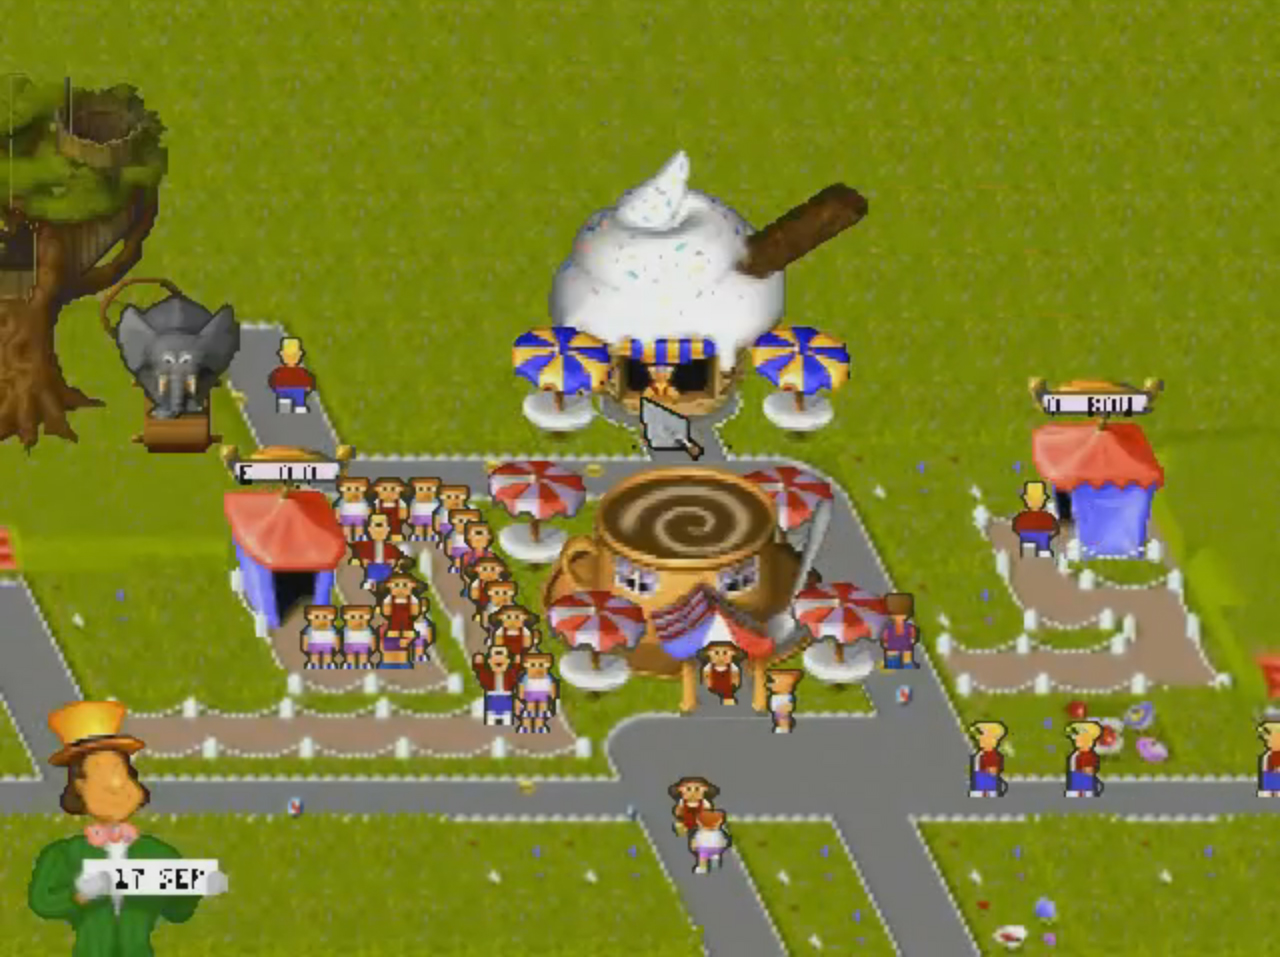 playstation 1 theme park game